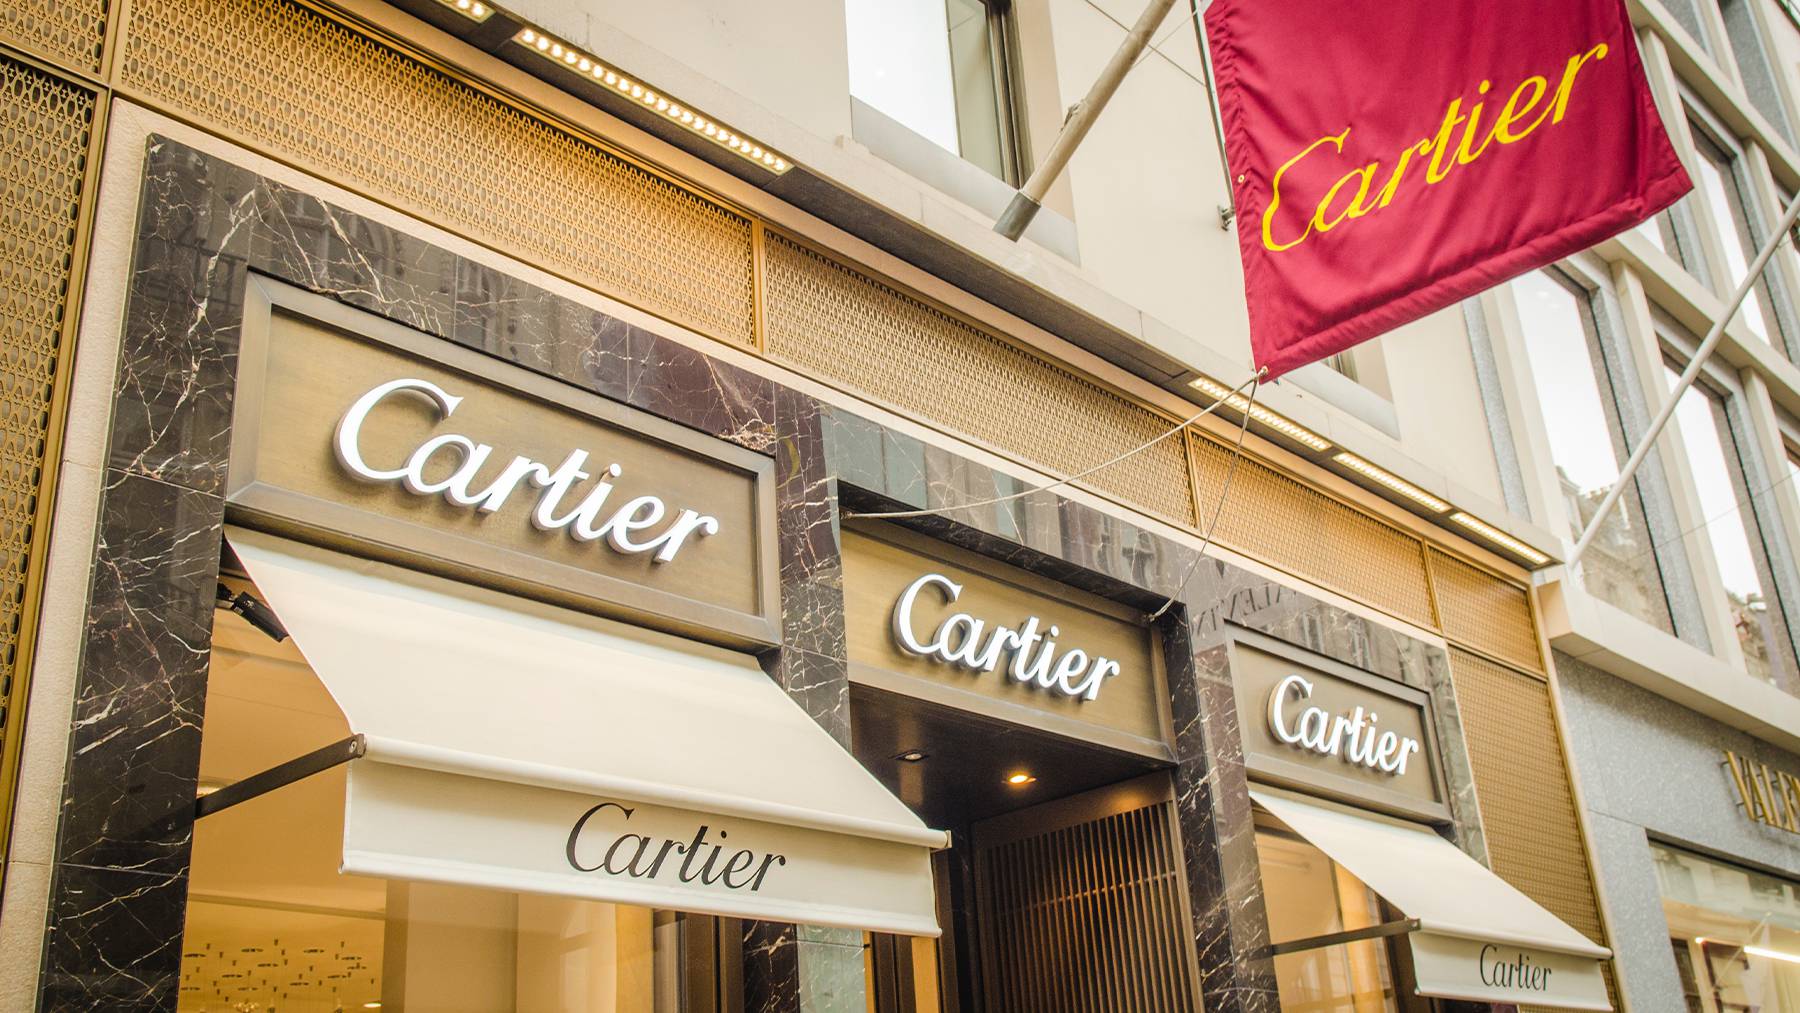 The exterior of a Cartier store in London. Store signs are shown above the door and on a red flag hanging outside.